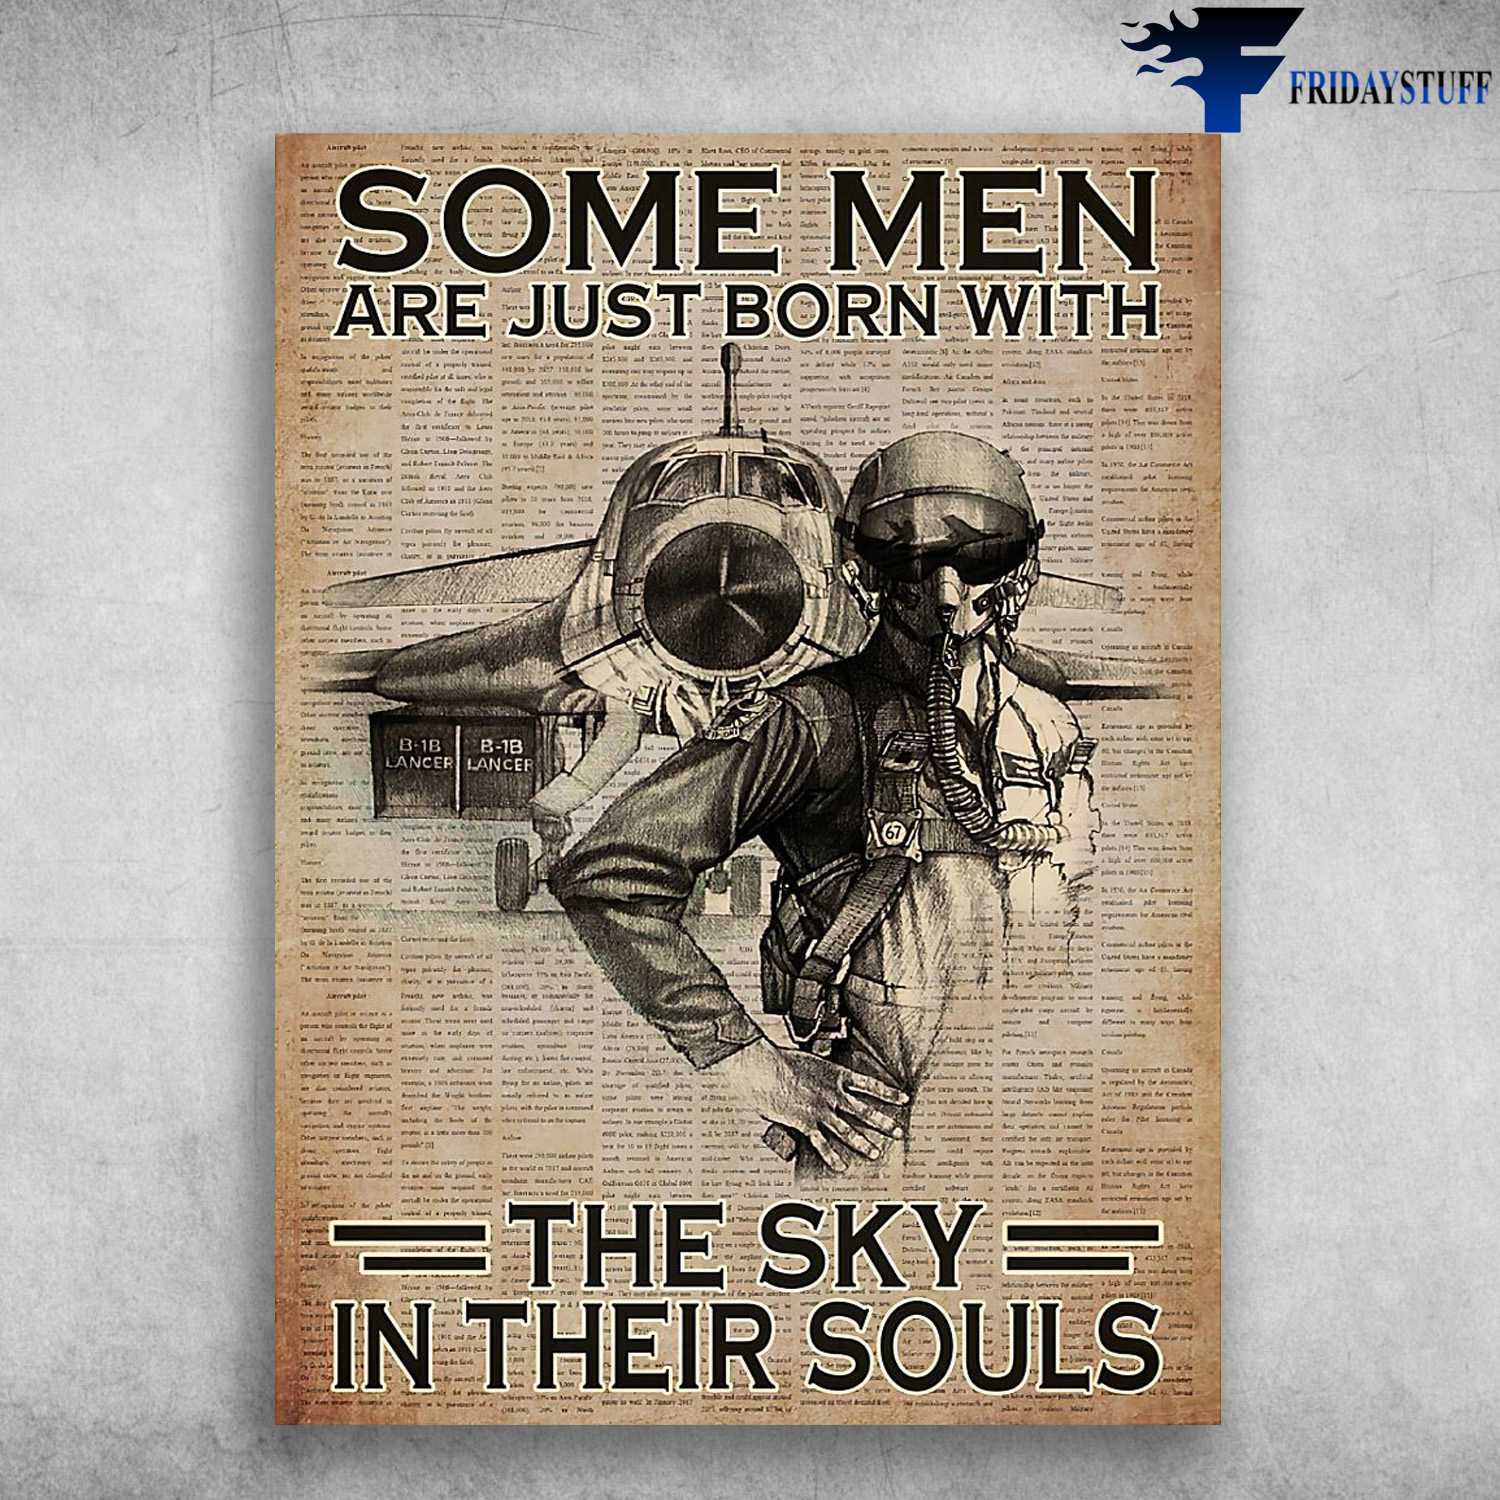 Pilot Man - Some Men Are Just Born With, The Sky In Their Souls